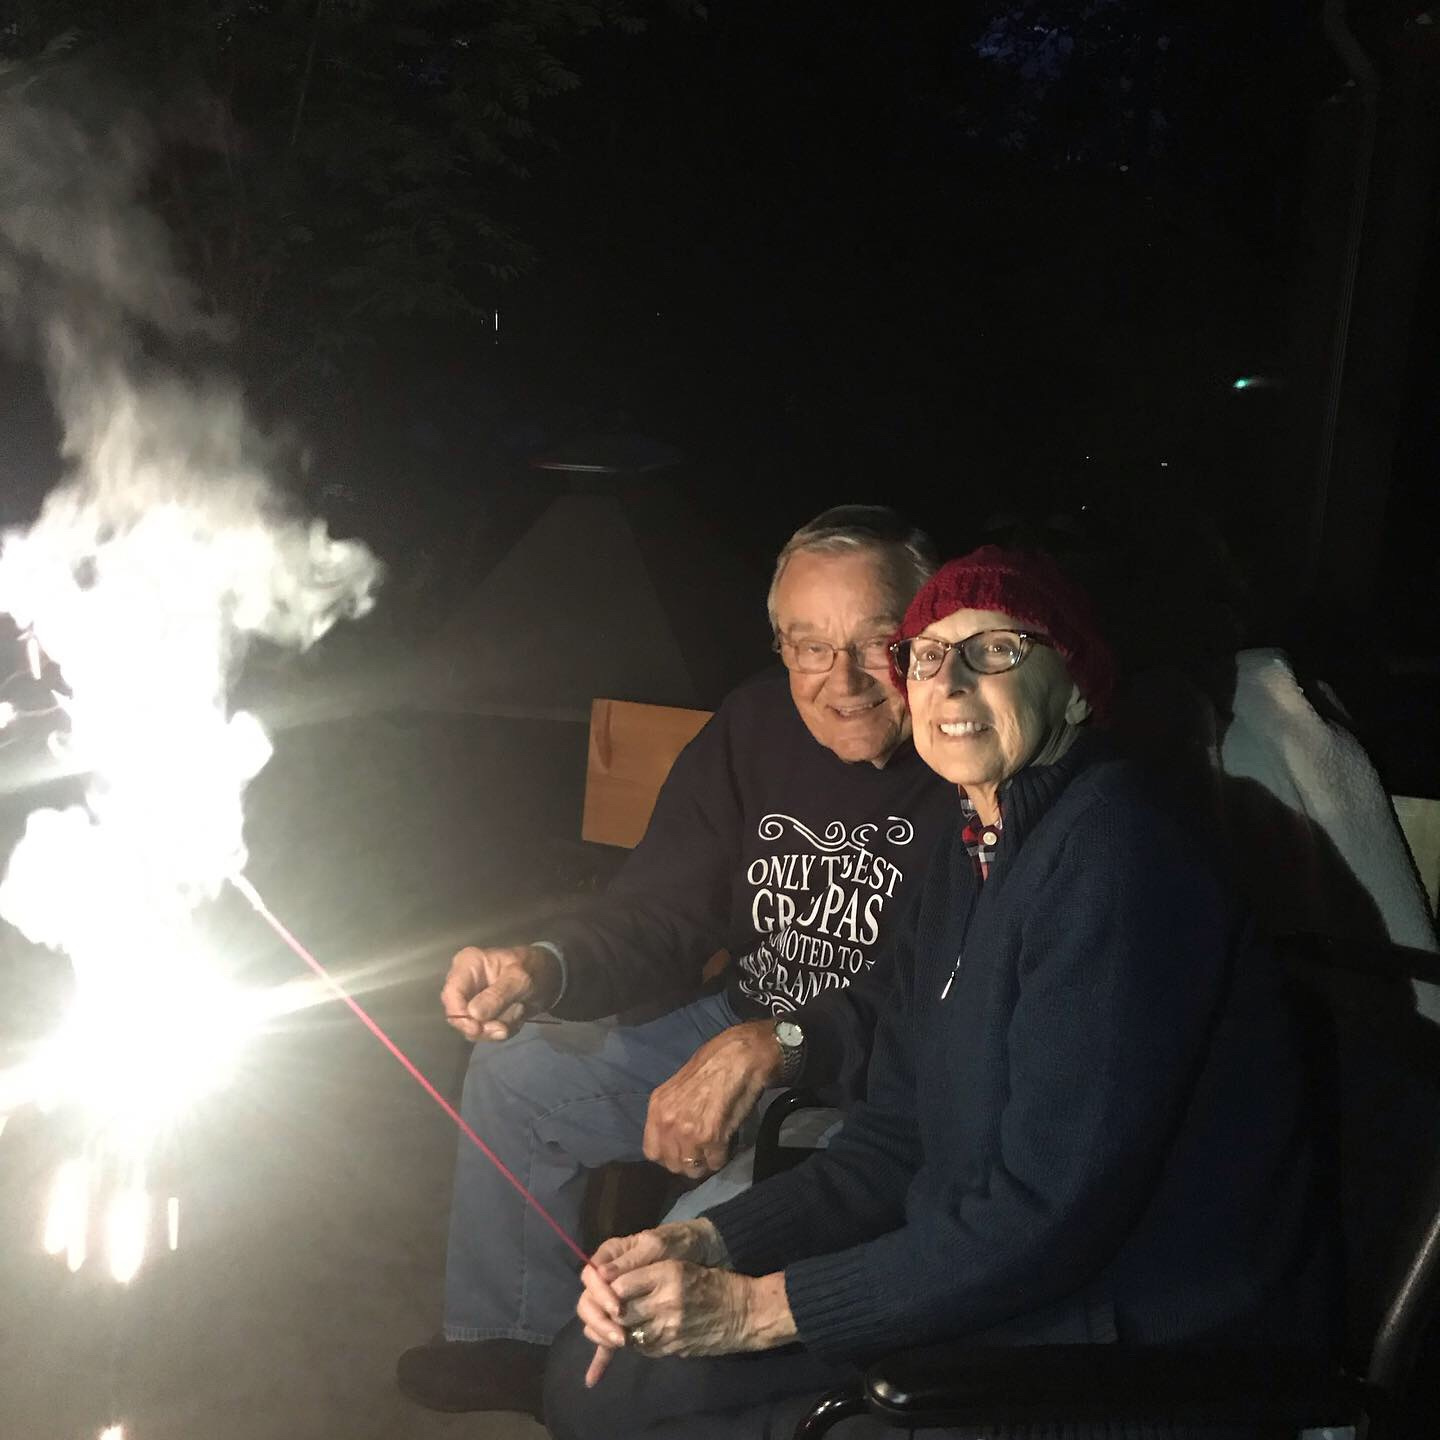 Happy 4th of July!  Grammy wanted sparklers and fireworks, so that's what we did!